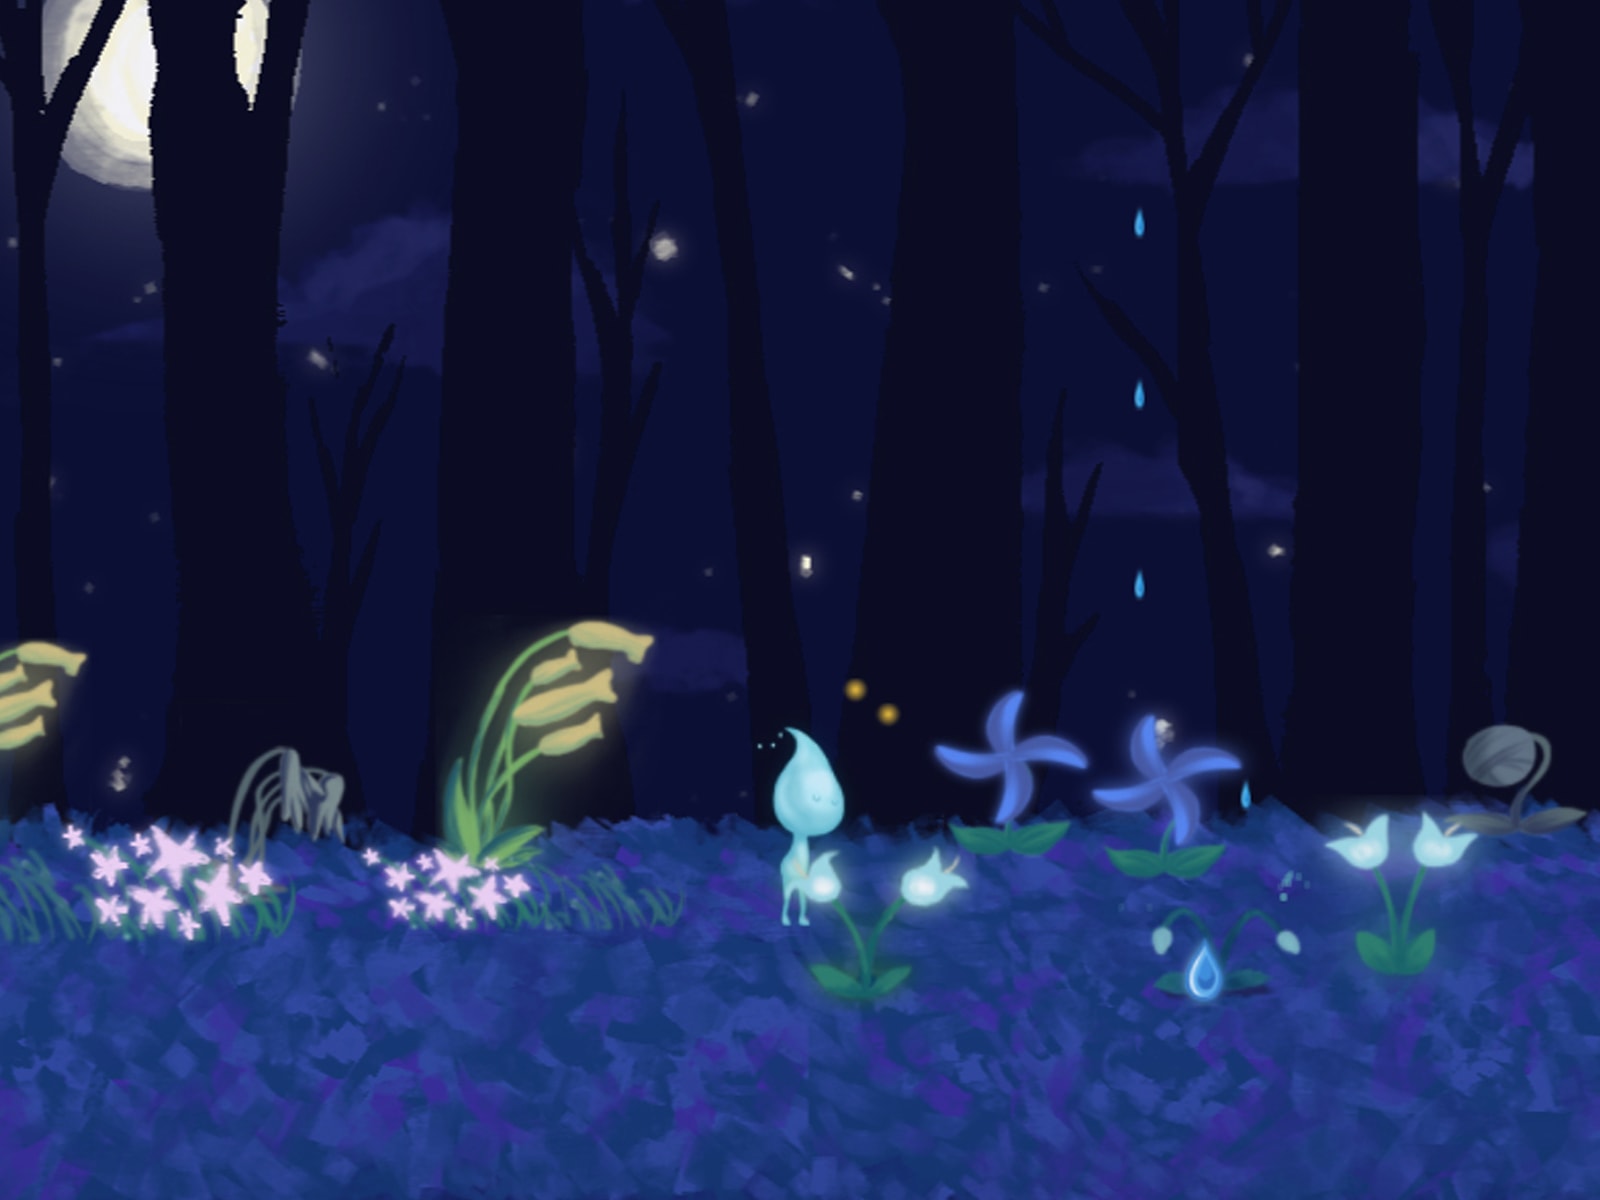 Screenshot from DigiPen student game Douse of a rain sprite with a water-droplet-shaped head with flowers in a dark forest